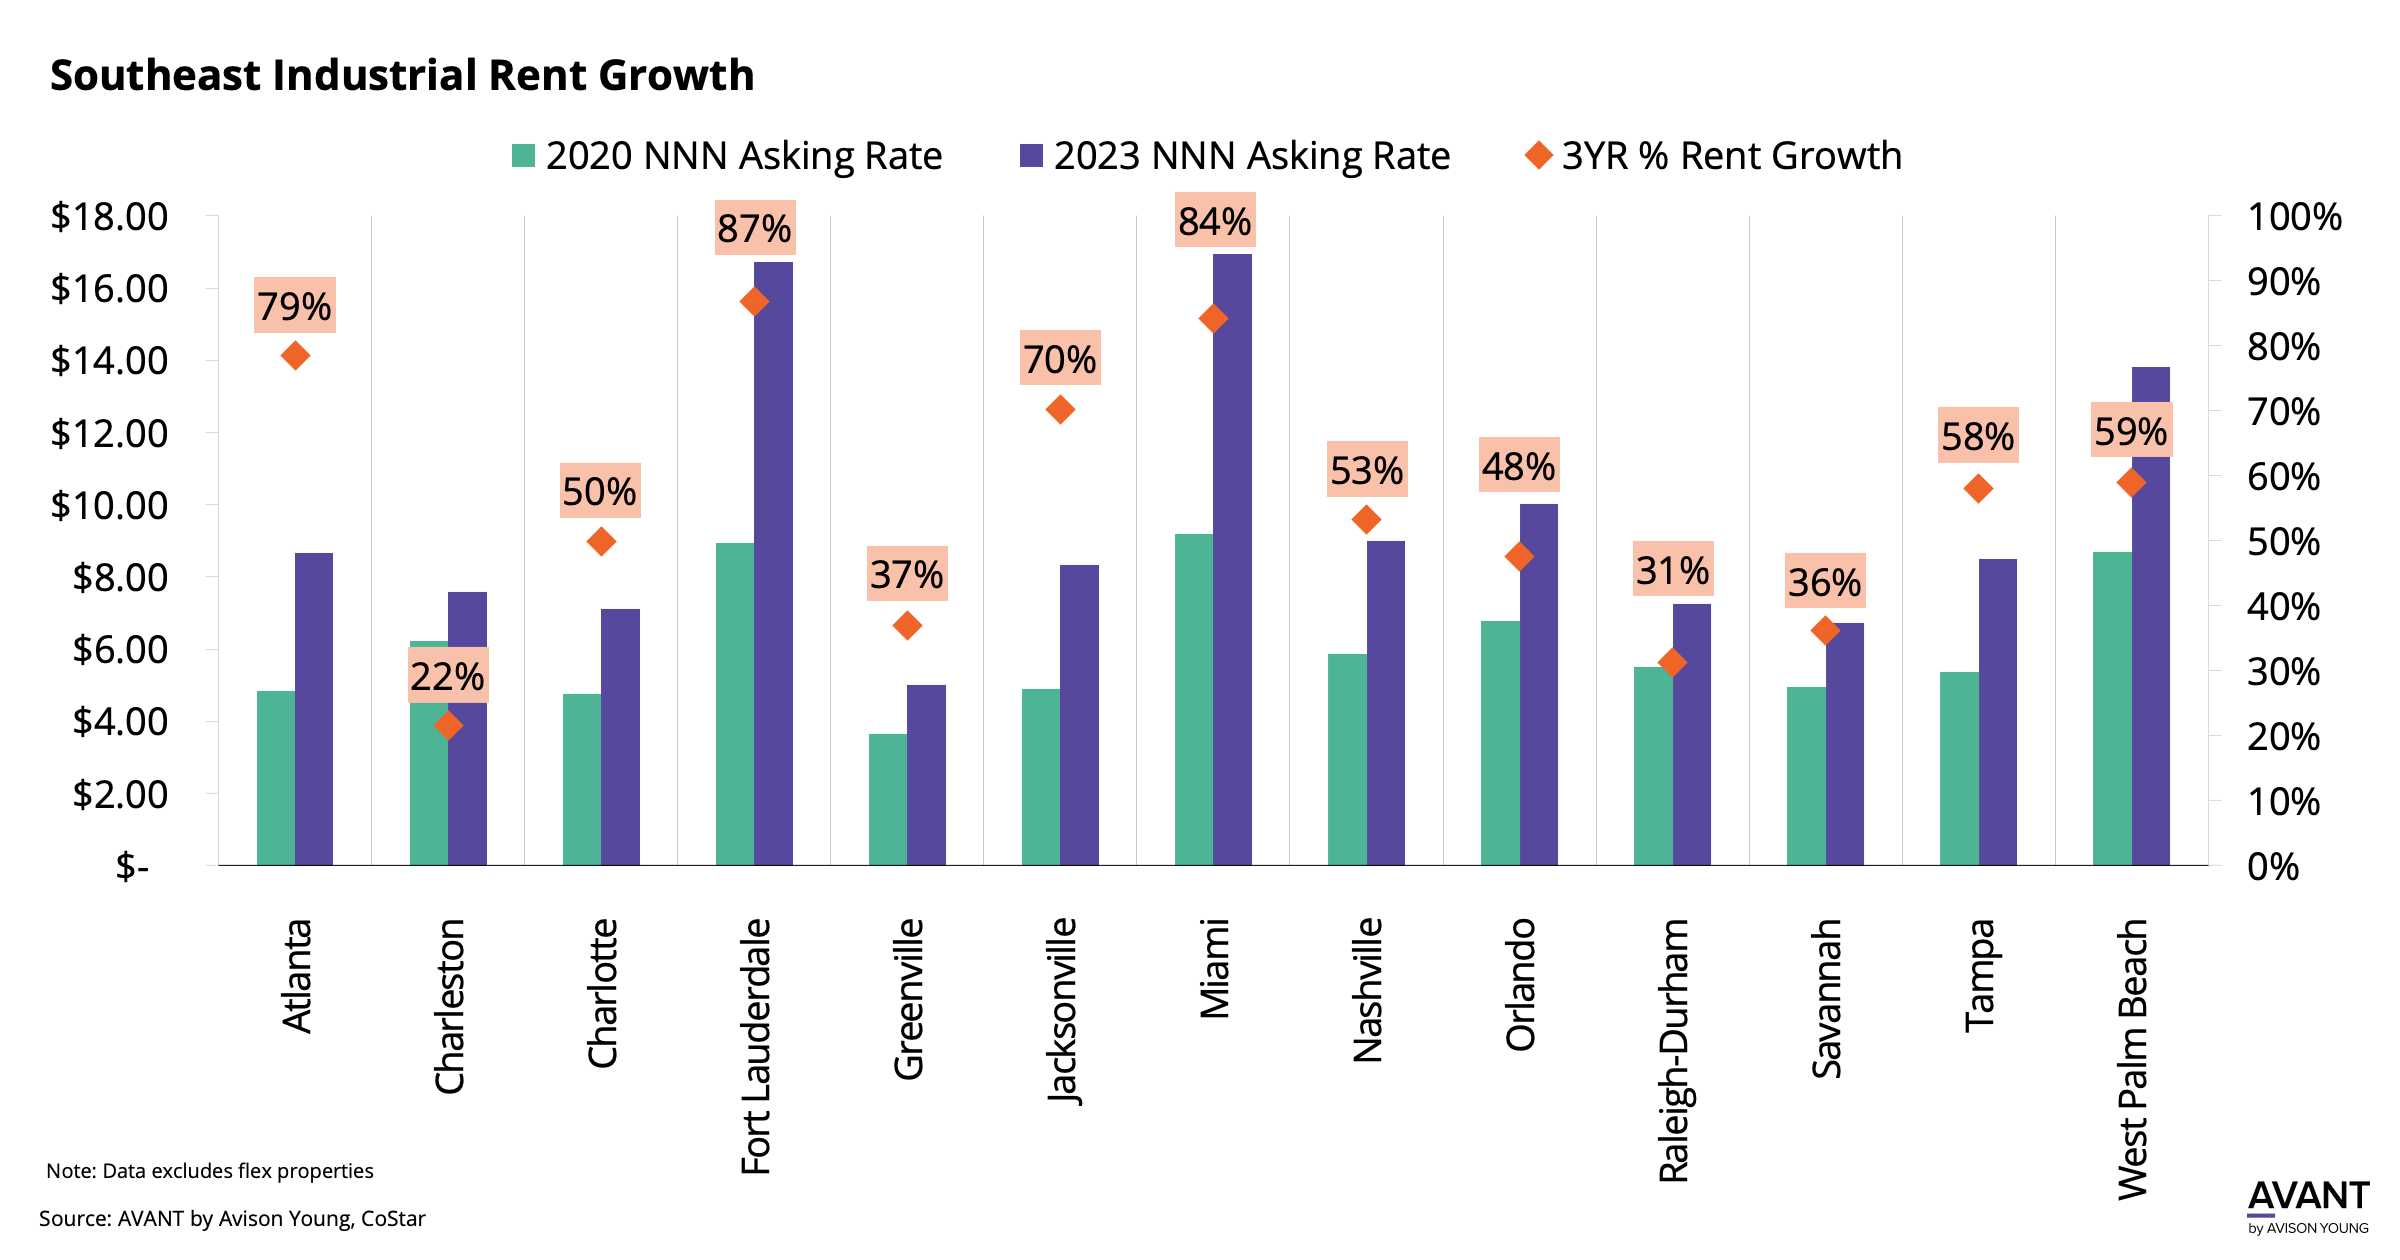 Southeast industrial rent growth by market